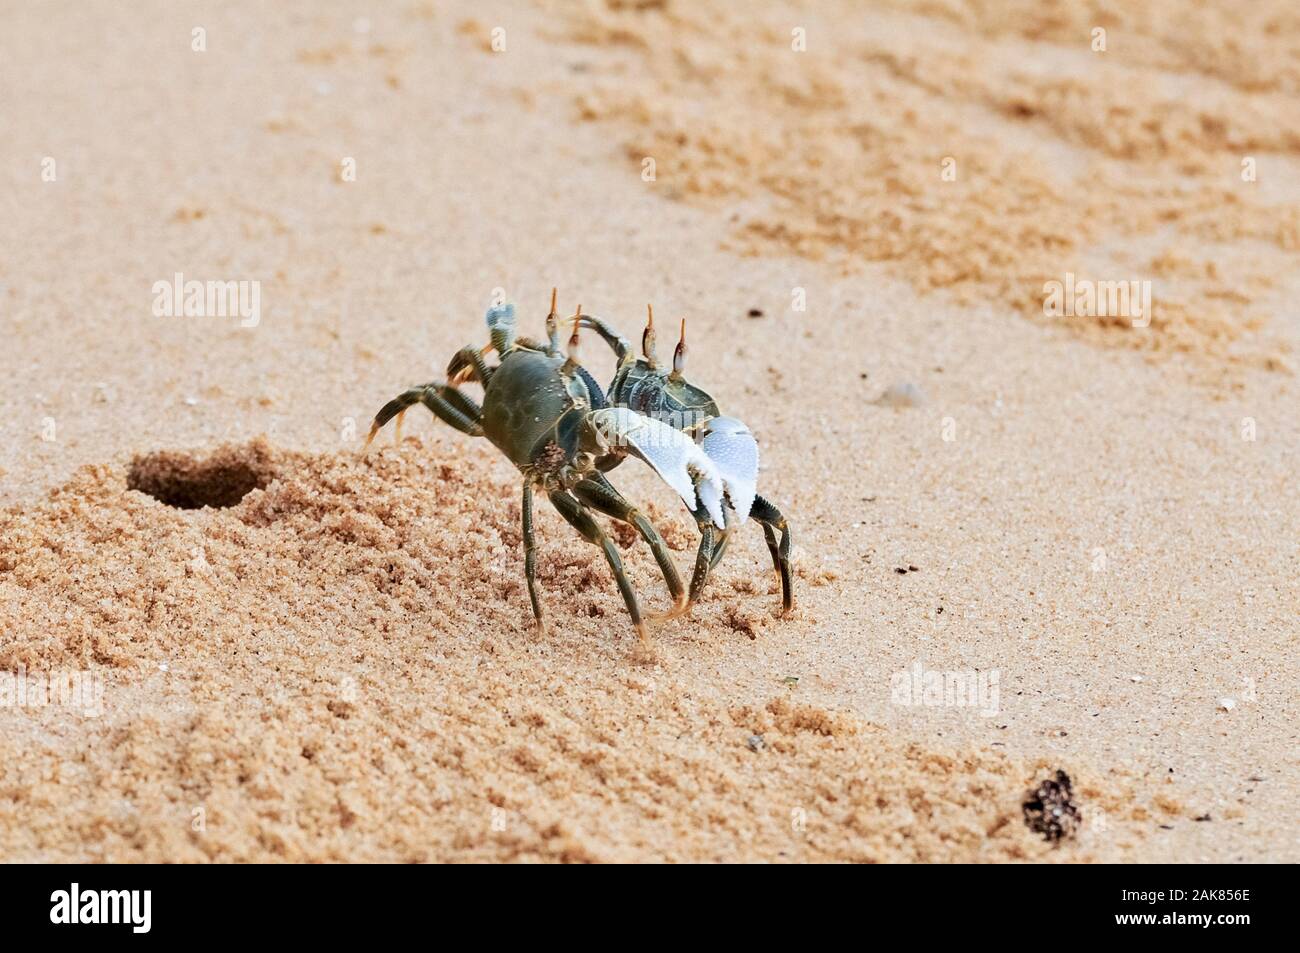 ghost crabs Ocypode species, fighting on the beach, Ankify, Madagascar, Indian Ocean Stock Photo